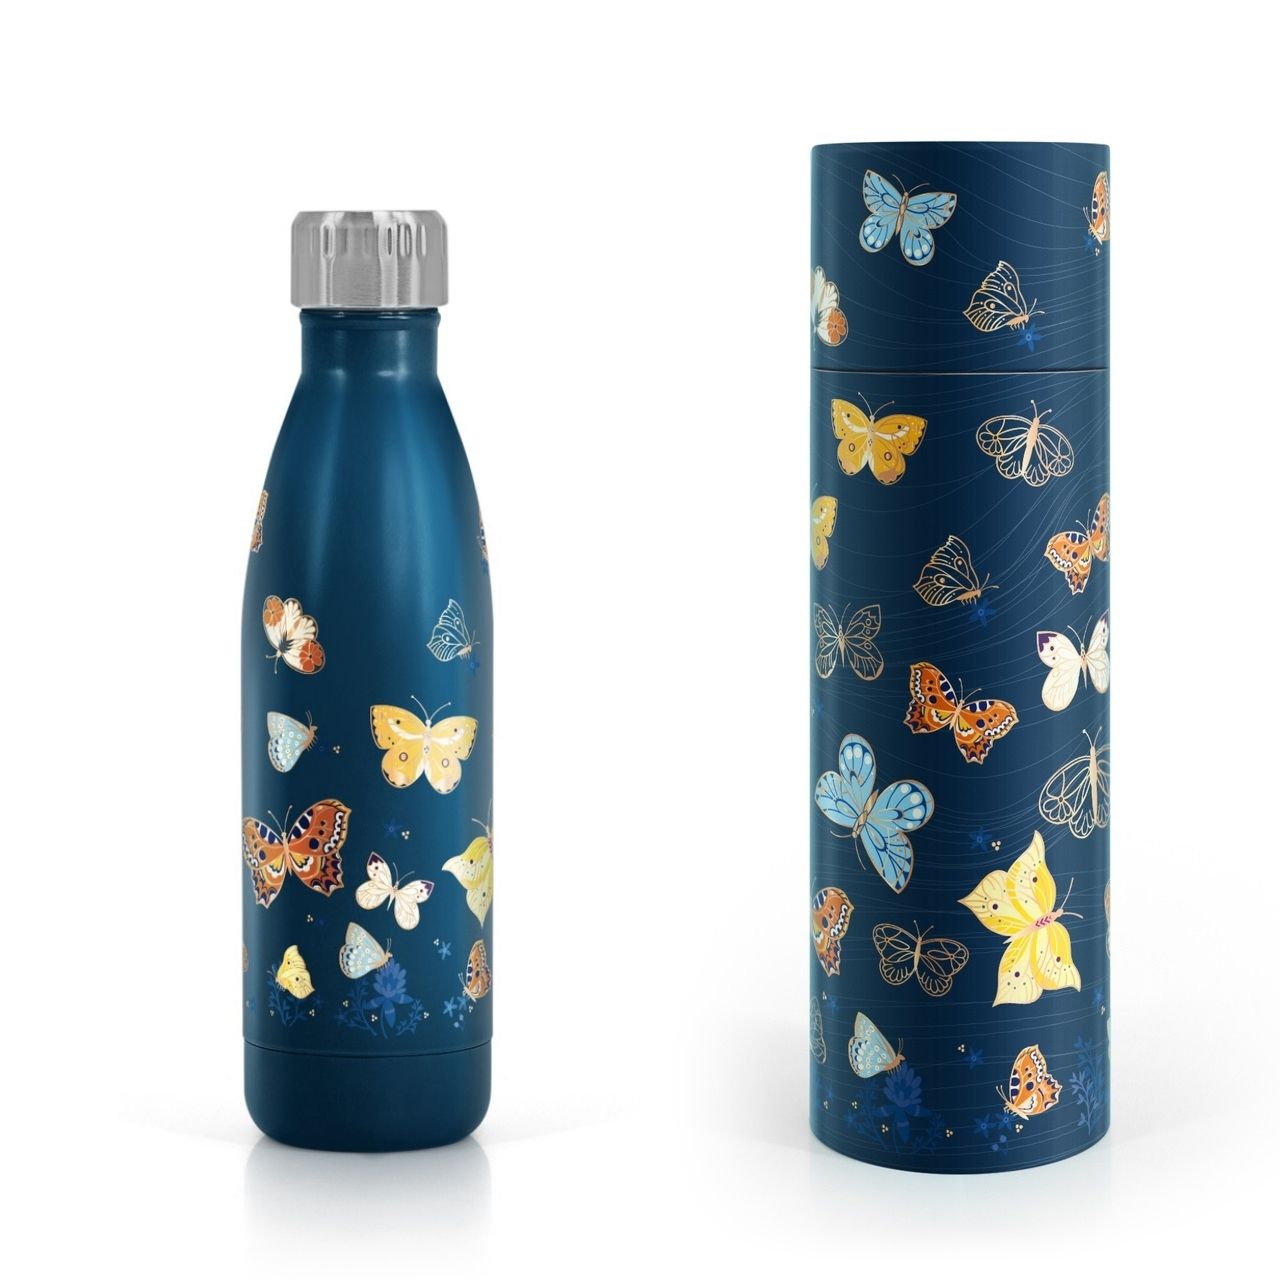 Tipperary Crystal Butterfly Metal Water Bottle  Drawing inspiration from urban garden, the Tipperary Crystal Butterfly collection transforms an icon into something modern and unexpected. Playful and elegant, this collection draws from the inherent beauty of the butterfly.